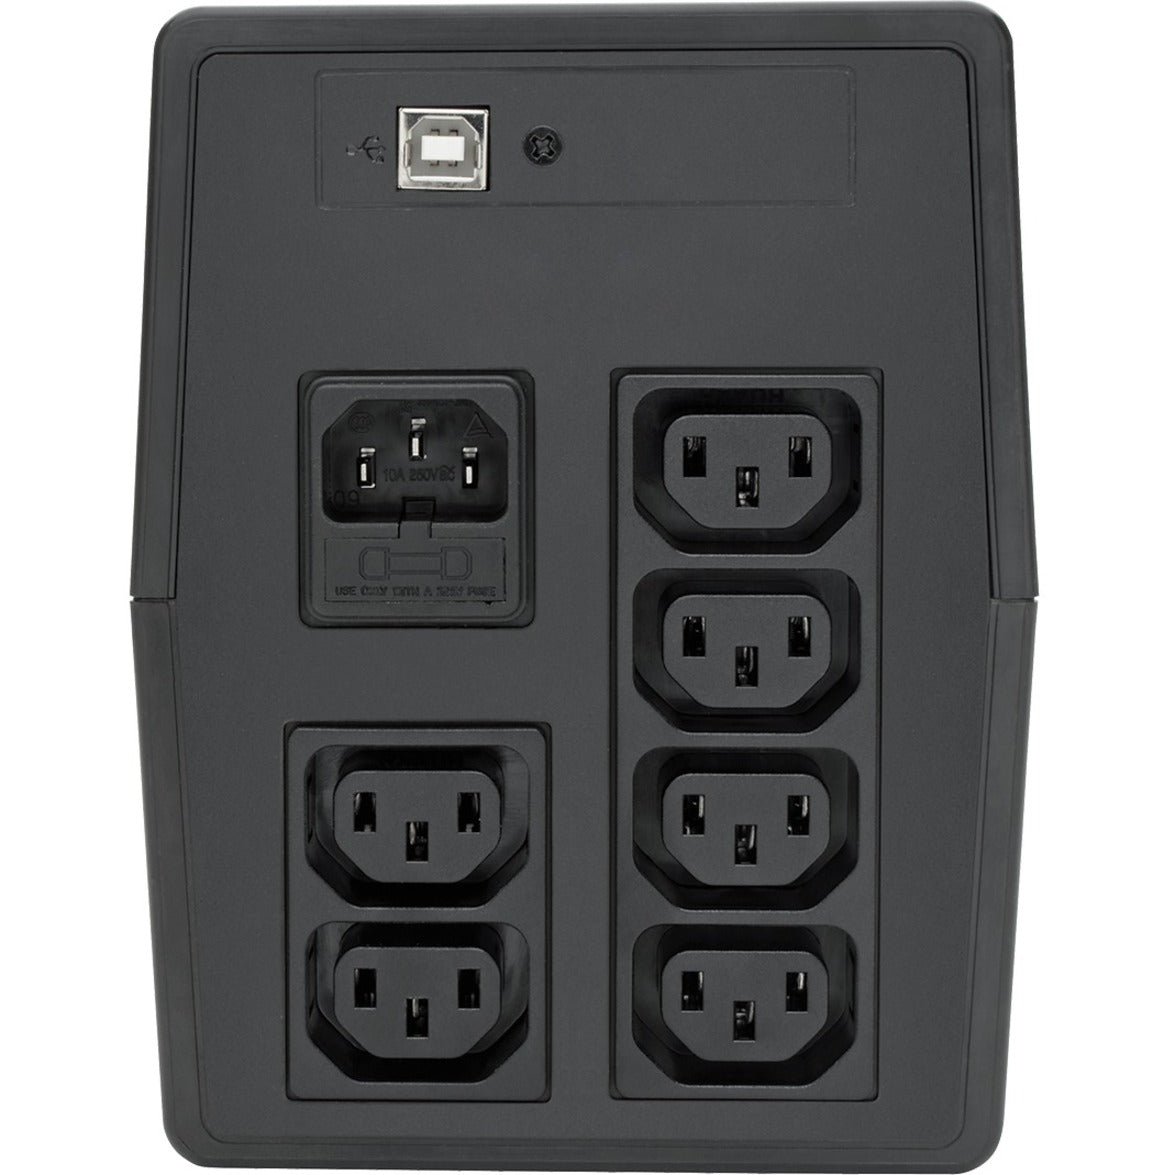 Tripp Lite UPS 850VA 480W Line-Interactive UPS with 6 C13 Outlets AVR 230V C14 Inlet LCD USB Tower